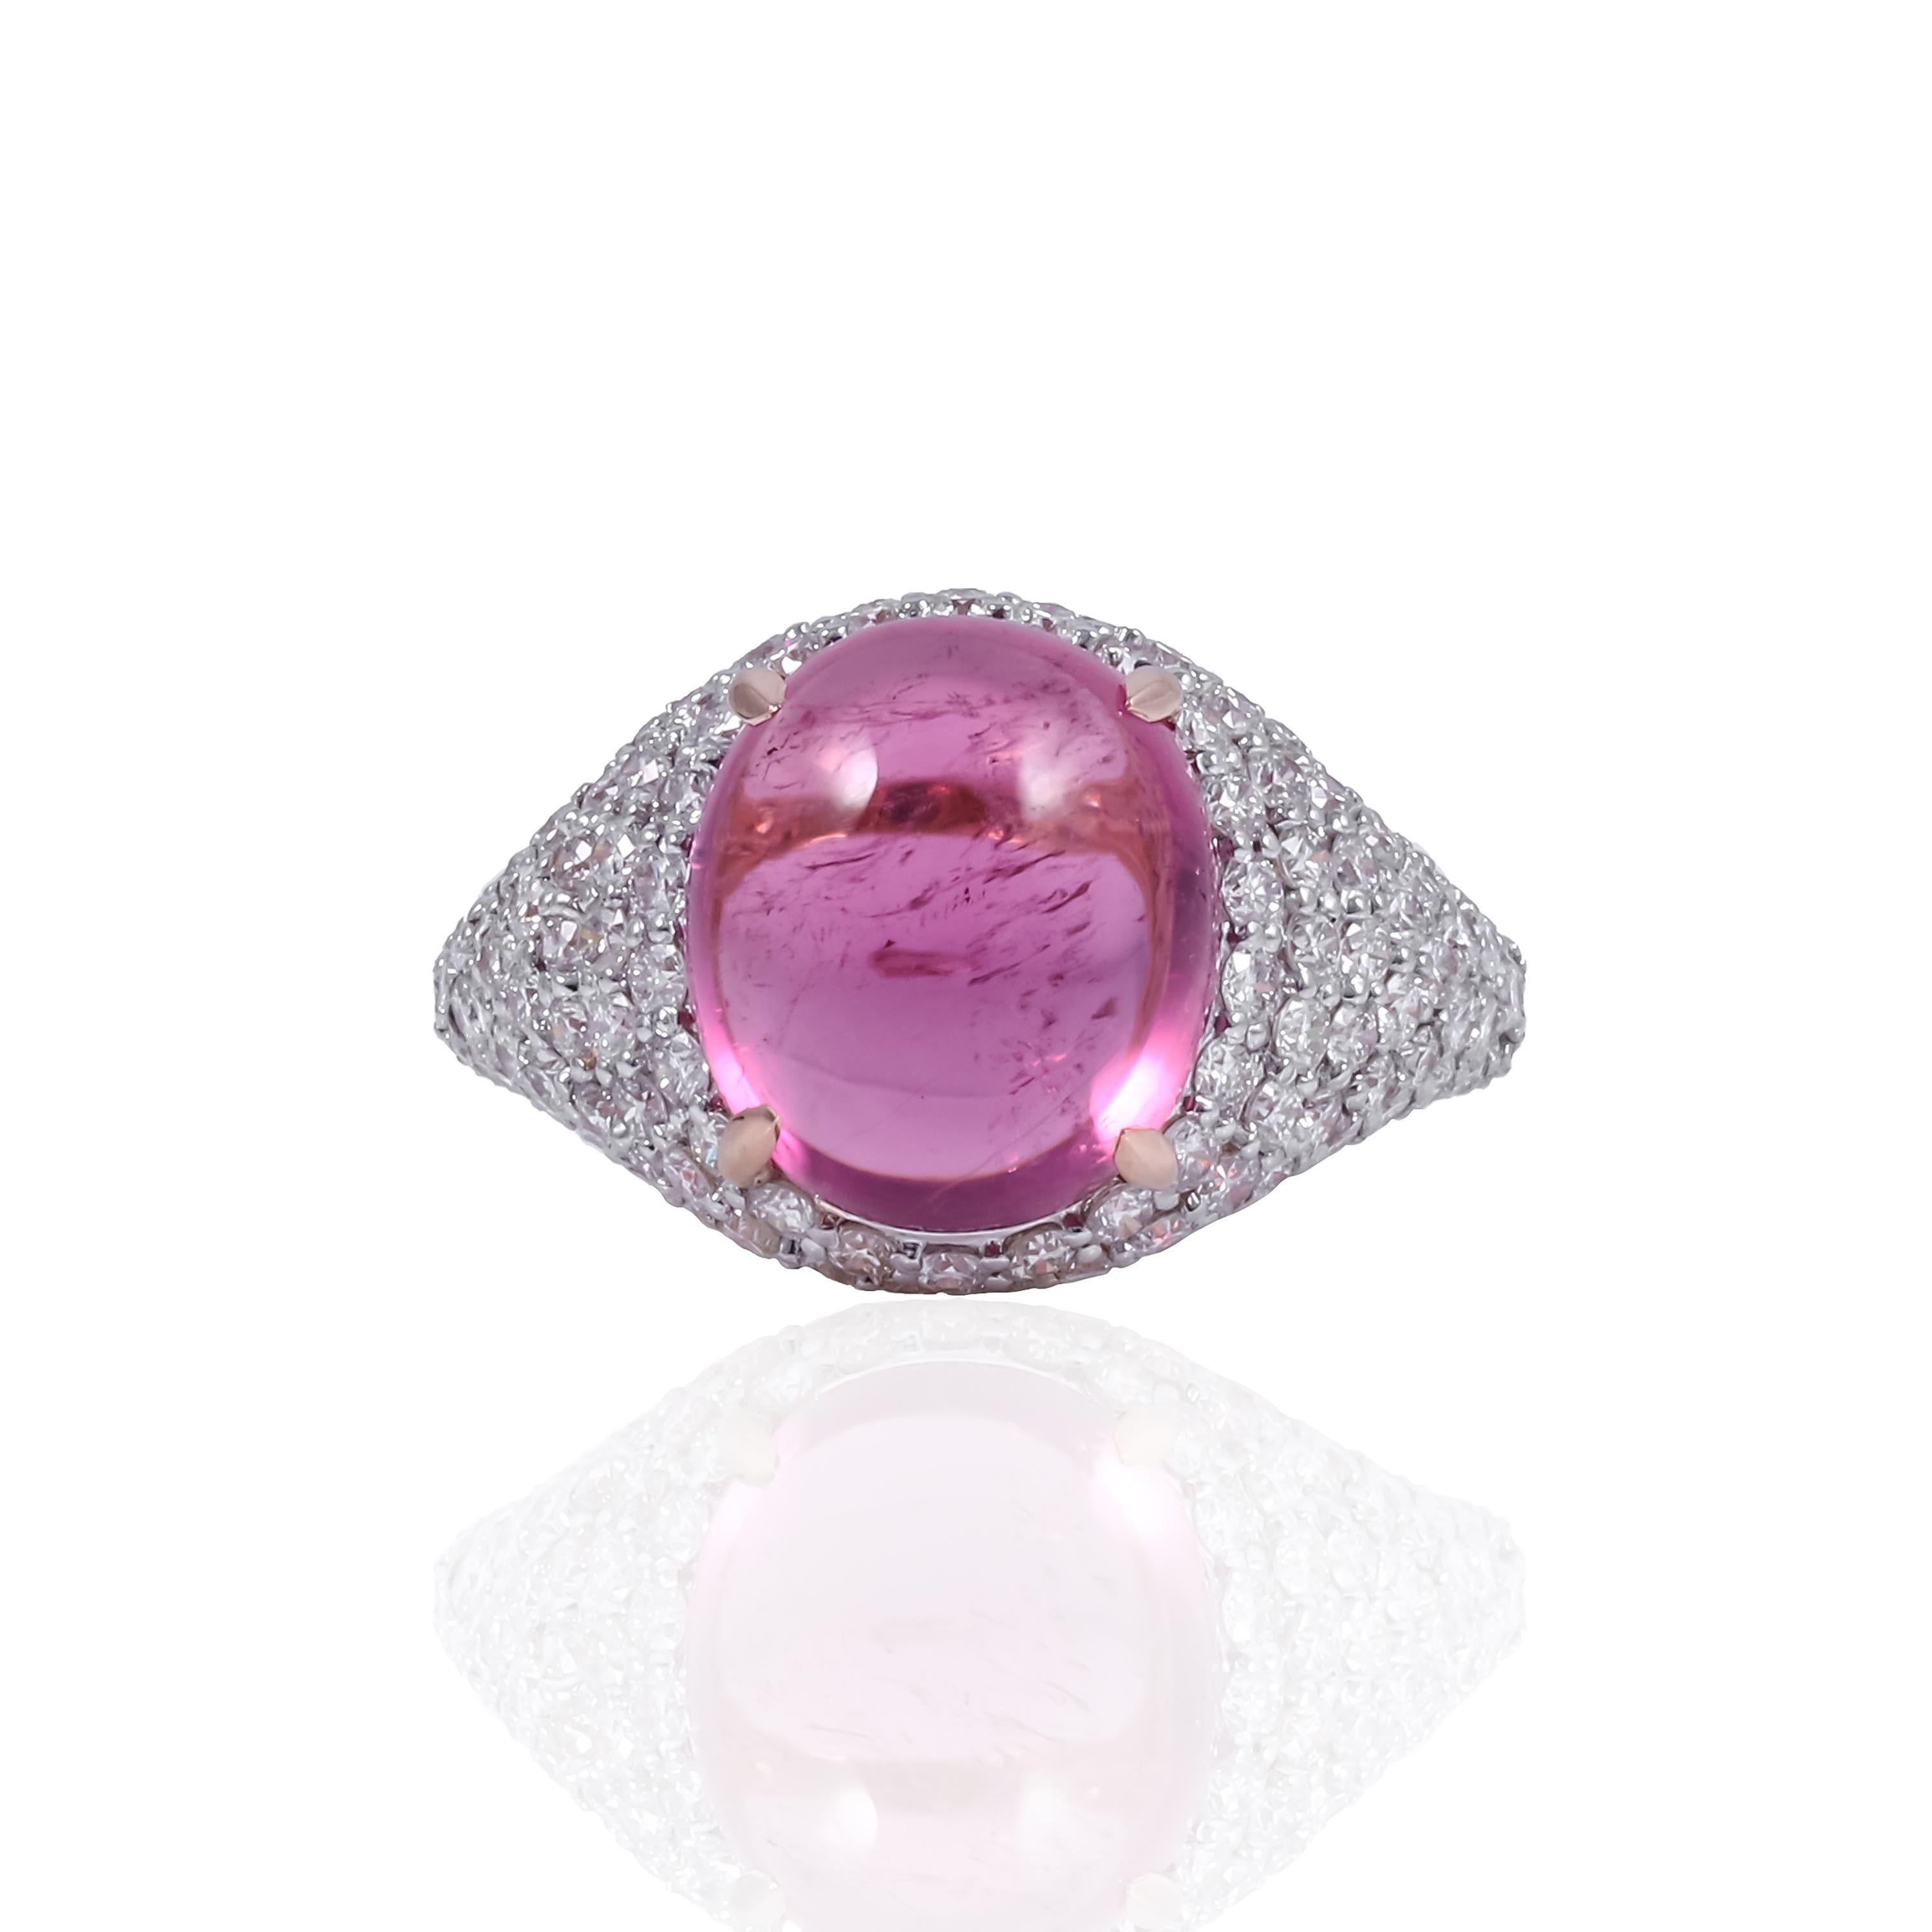 Introducing our stunning Pink Tourmaline Ring – a true beauty that'll make you swoon! This gorgeous ring features a dazzling 6.55 carat pink tourmaline stone that's sure to steal the spotlight. Its Gross Weight is 5.36 grams.

The sides of the band